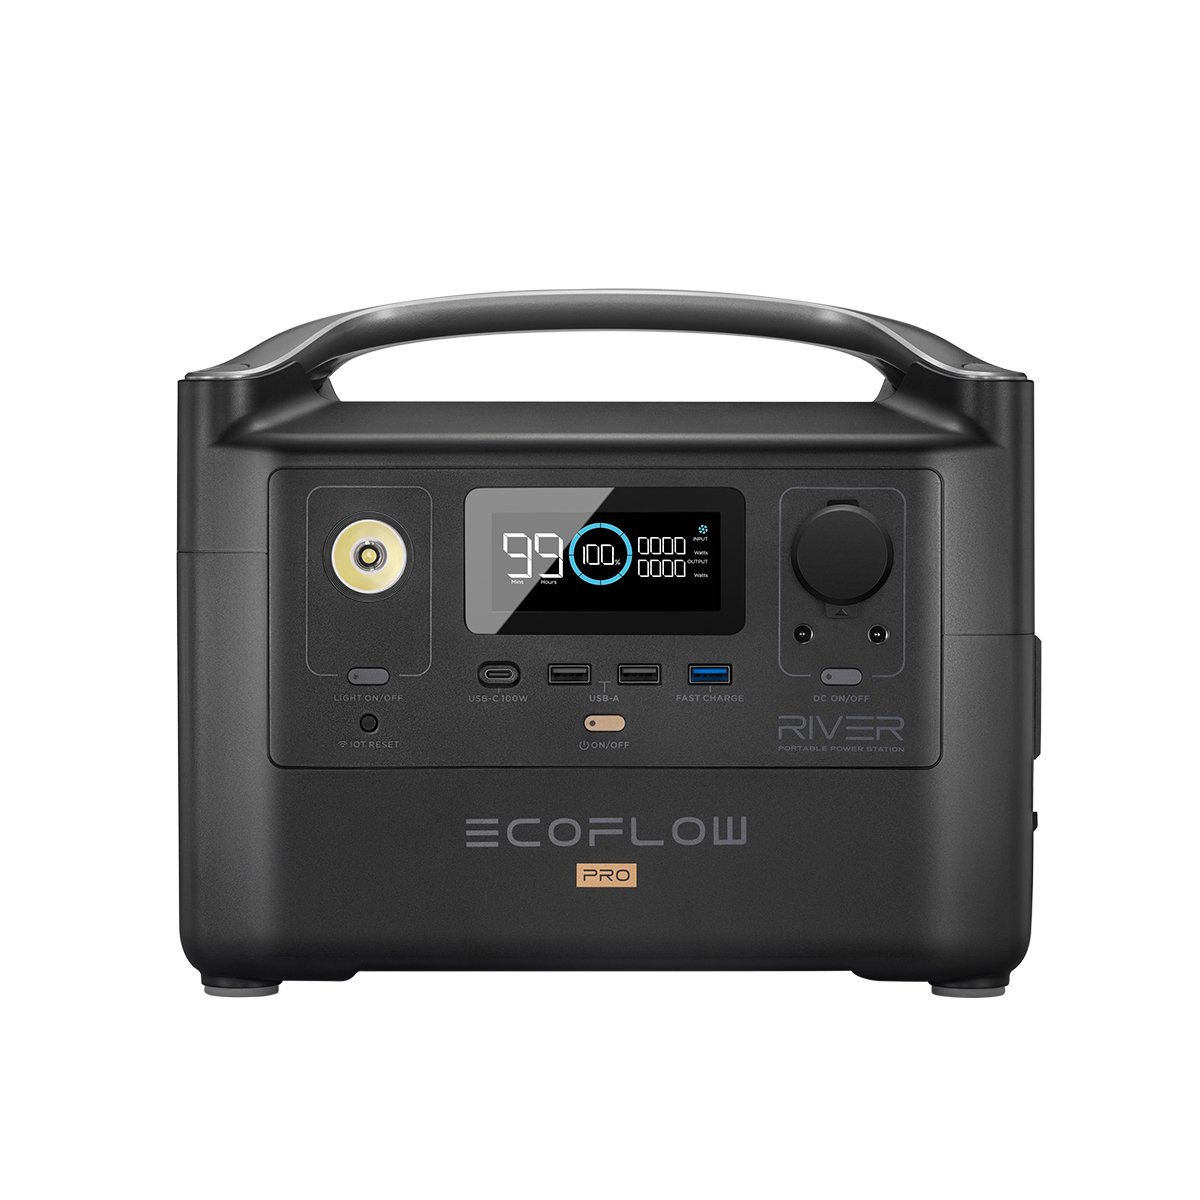 ECOFLOW RIVER PRO Portable Power Station 720WH/600W Outdoor Camping RV Backup Lithium Batter 200,000mAh AC Outlets